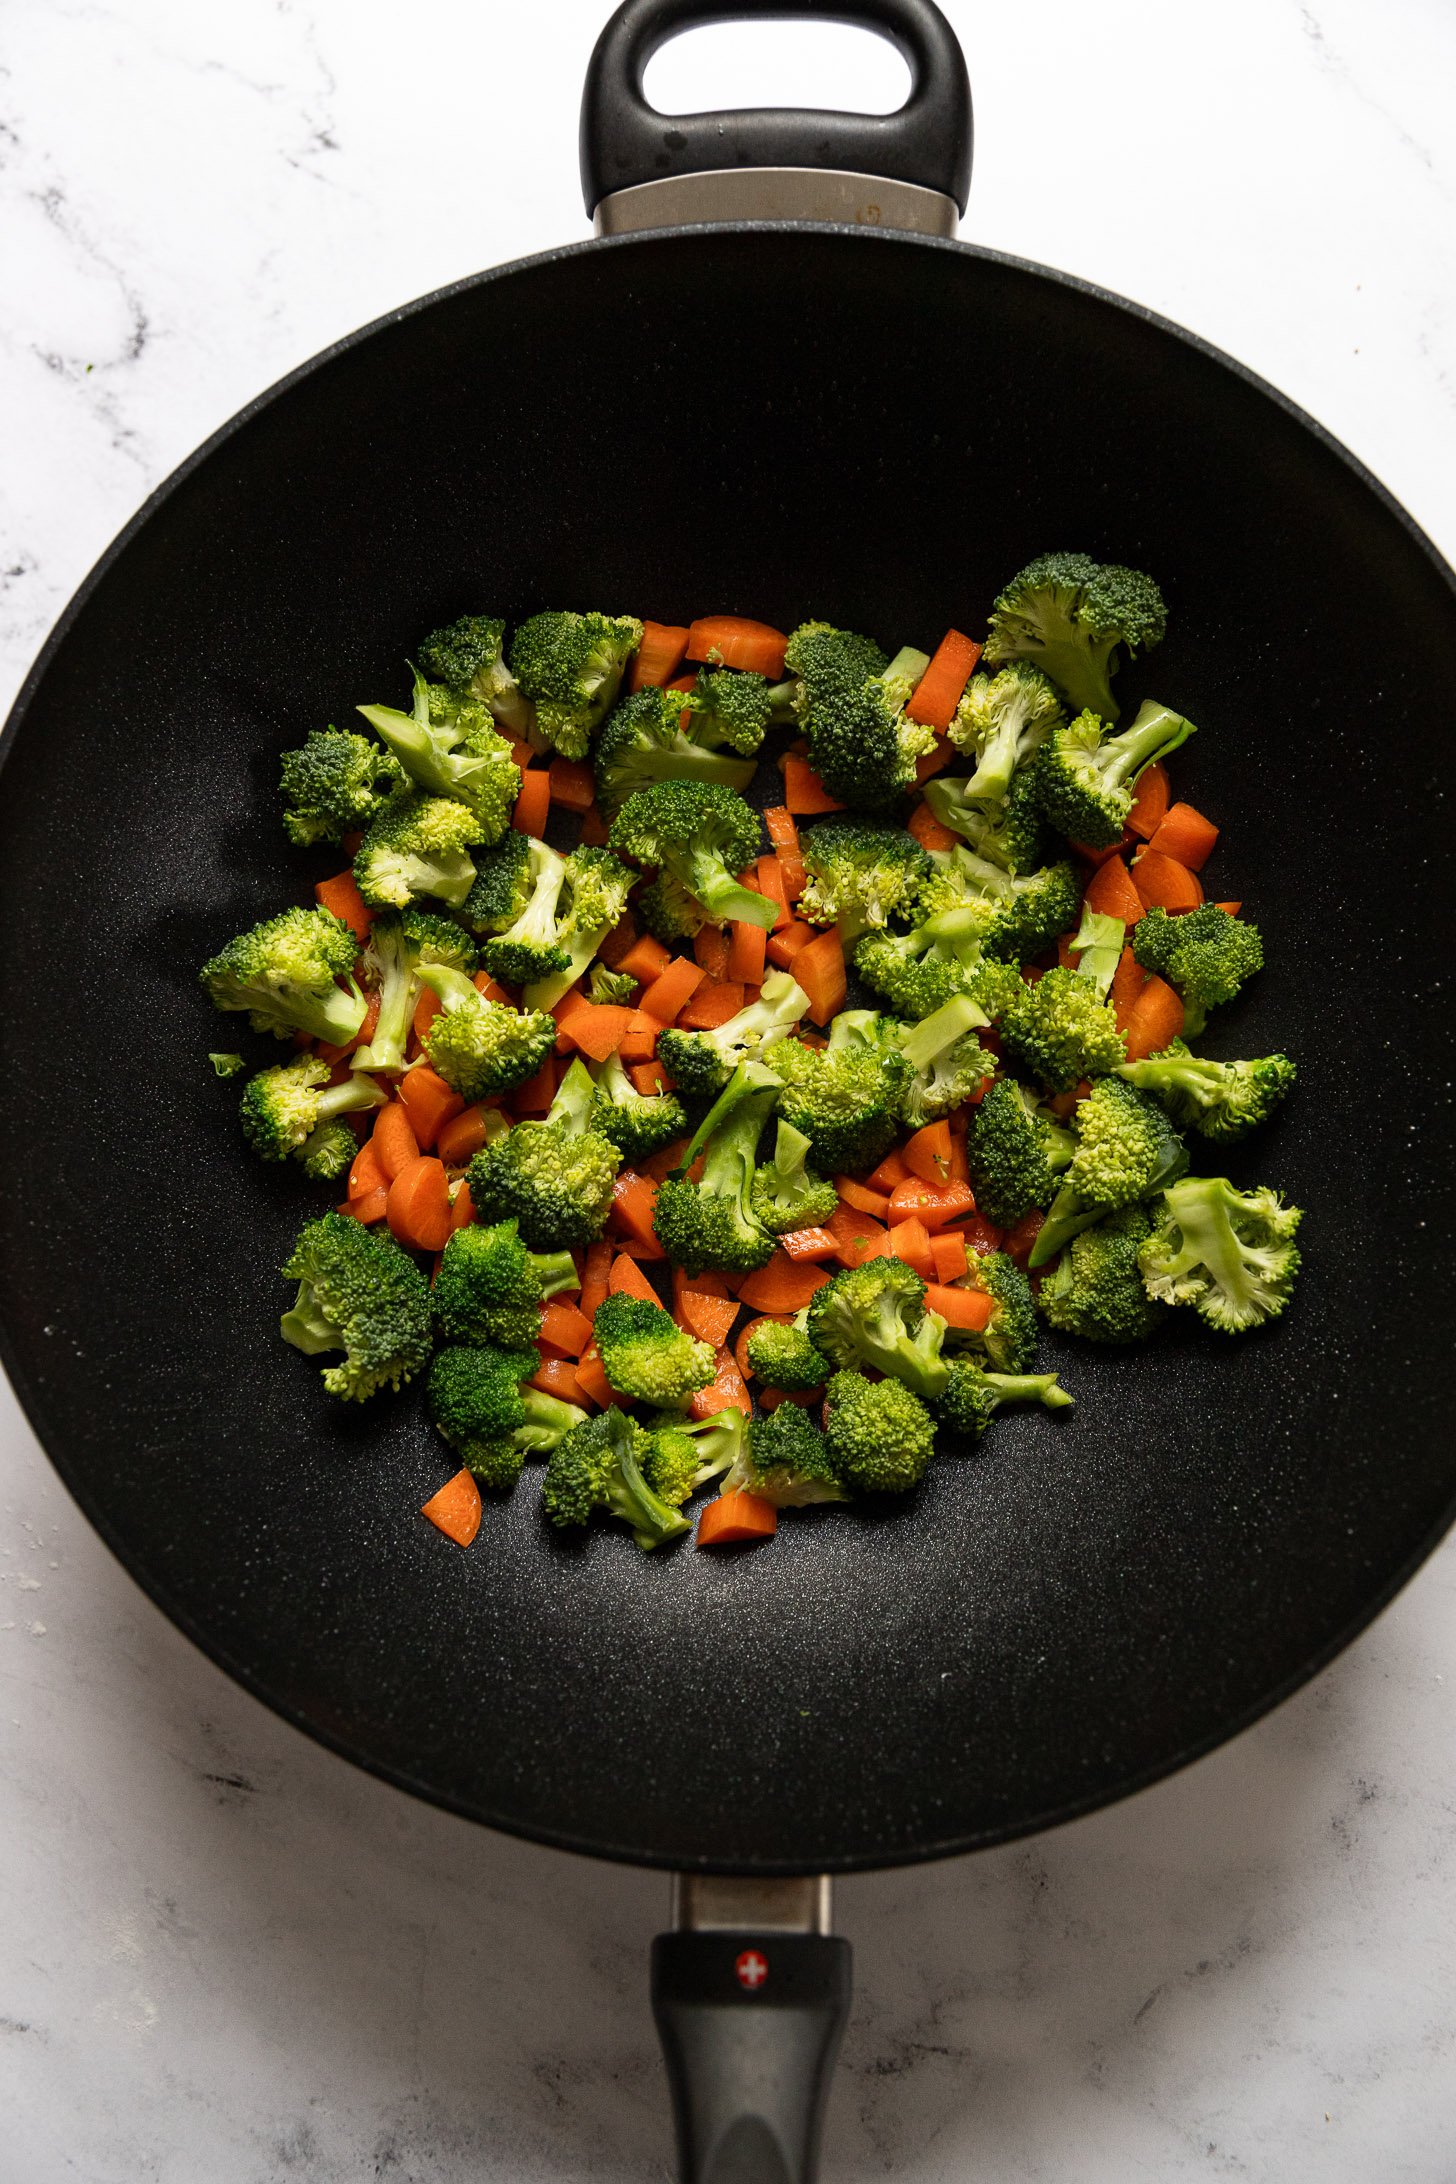 Broccoli and carrots in wok.